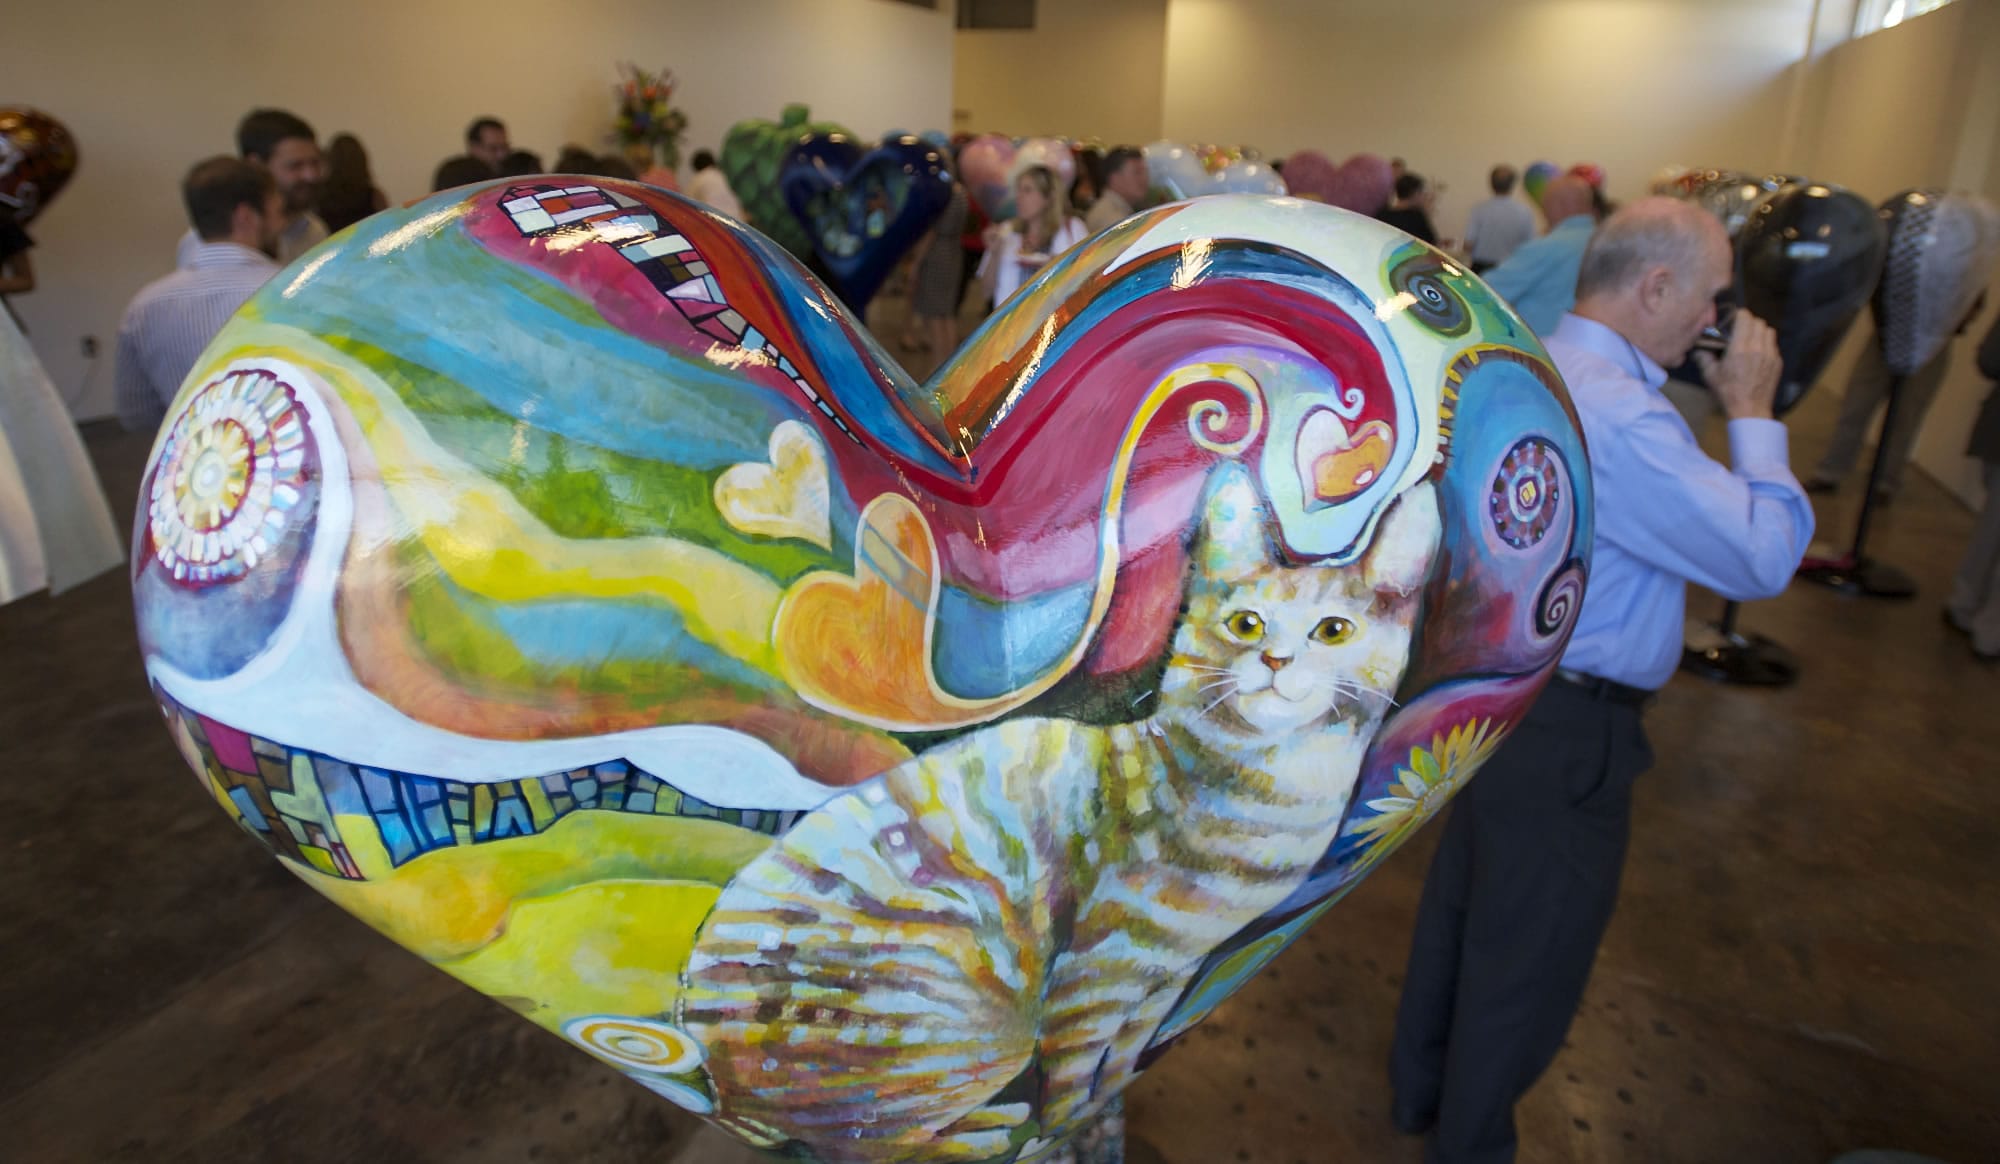 Super-Cat-A-Licious by artist Amelia Opie was one of the first heart statues to greet visitors during an artist reception for The Beat Goes On - HeArts of Clark County fundraising campaign in July.